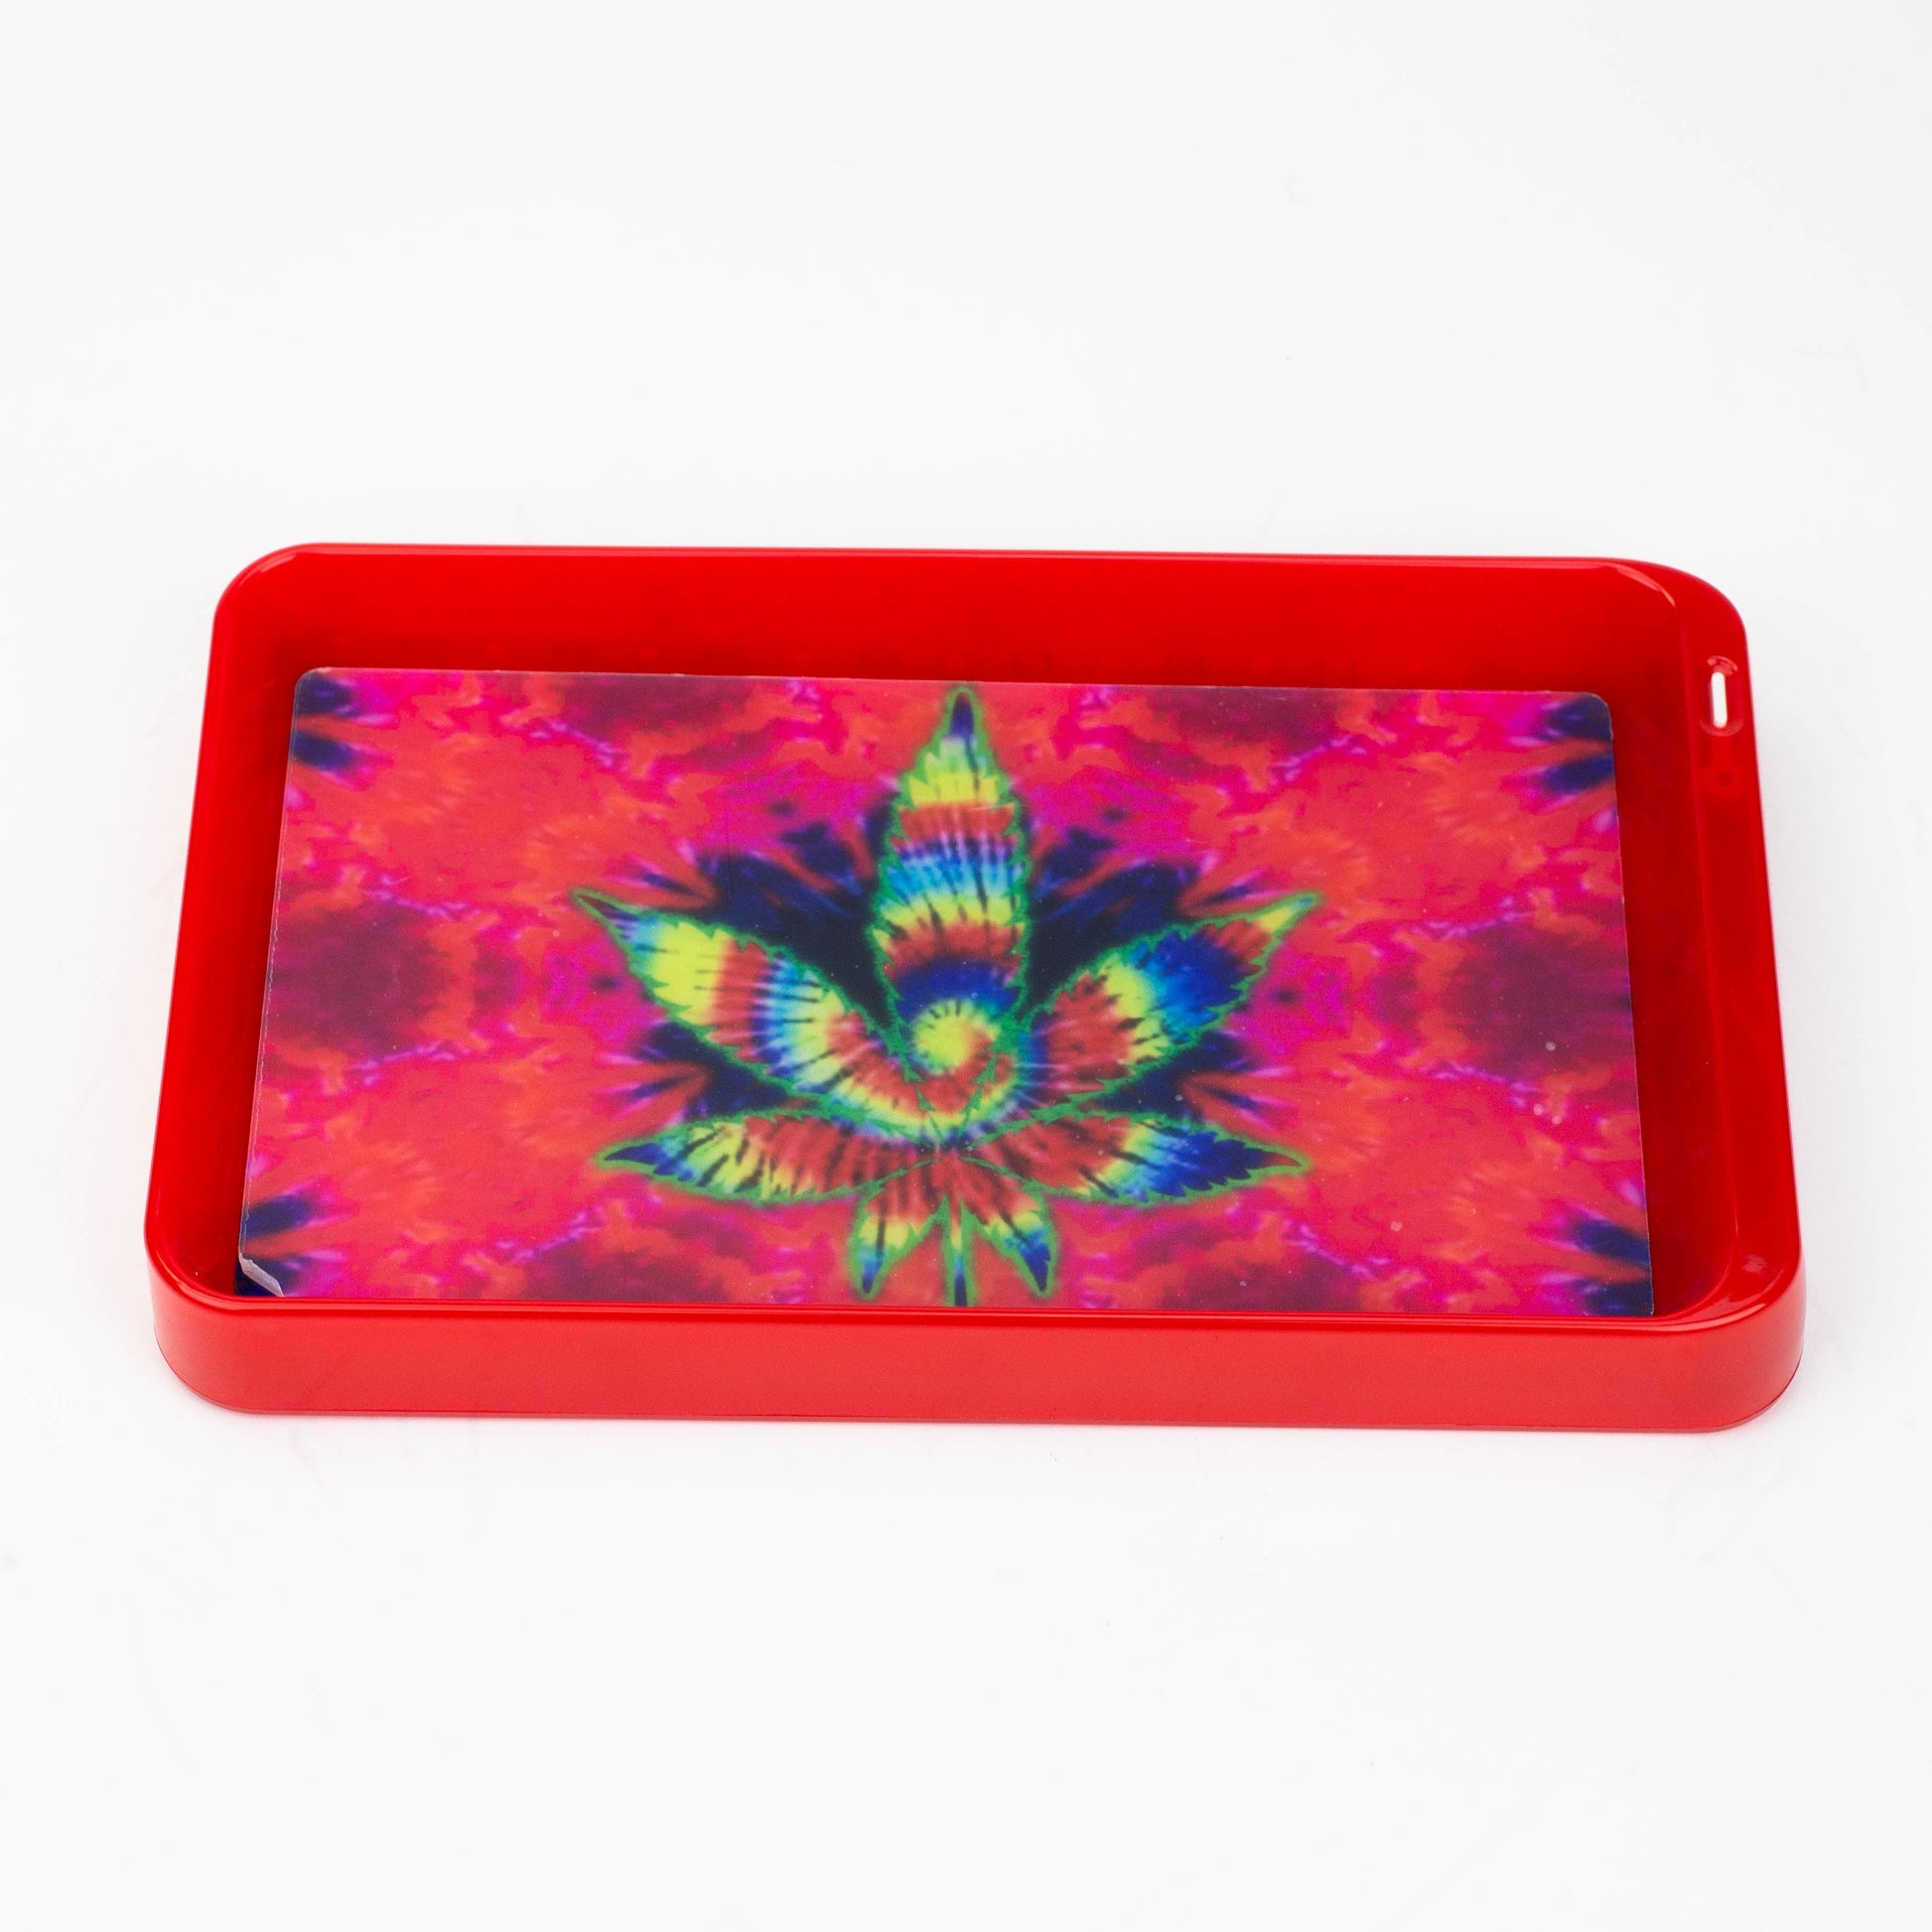 Character 7 Changeable colours LED Rolling Tray_25